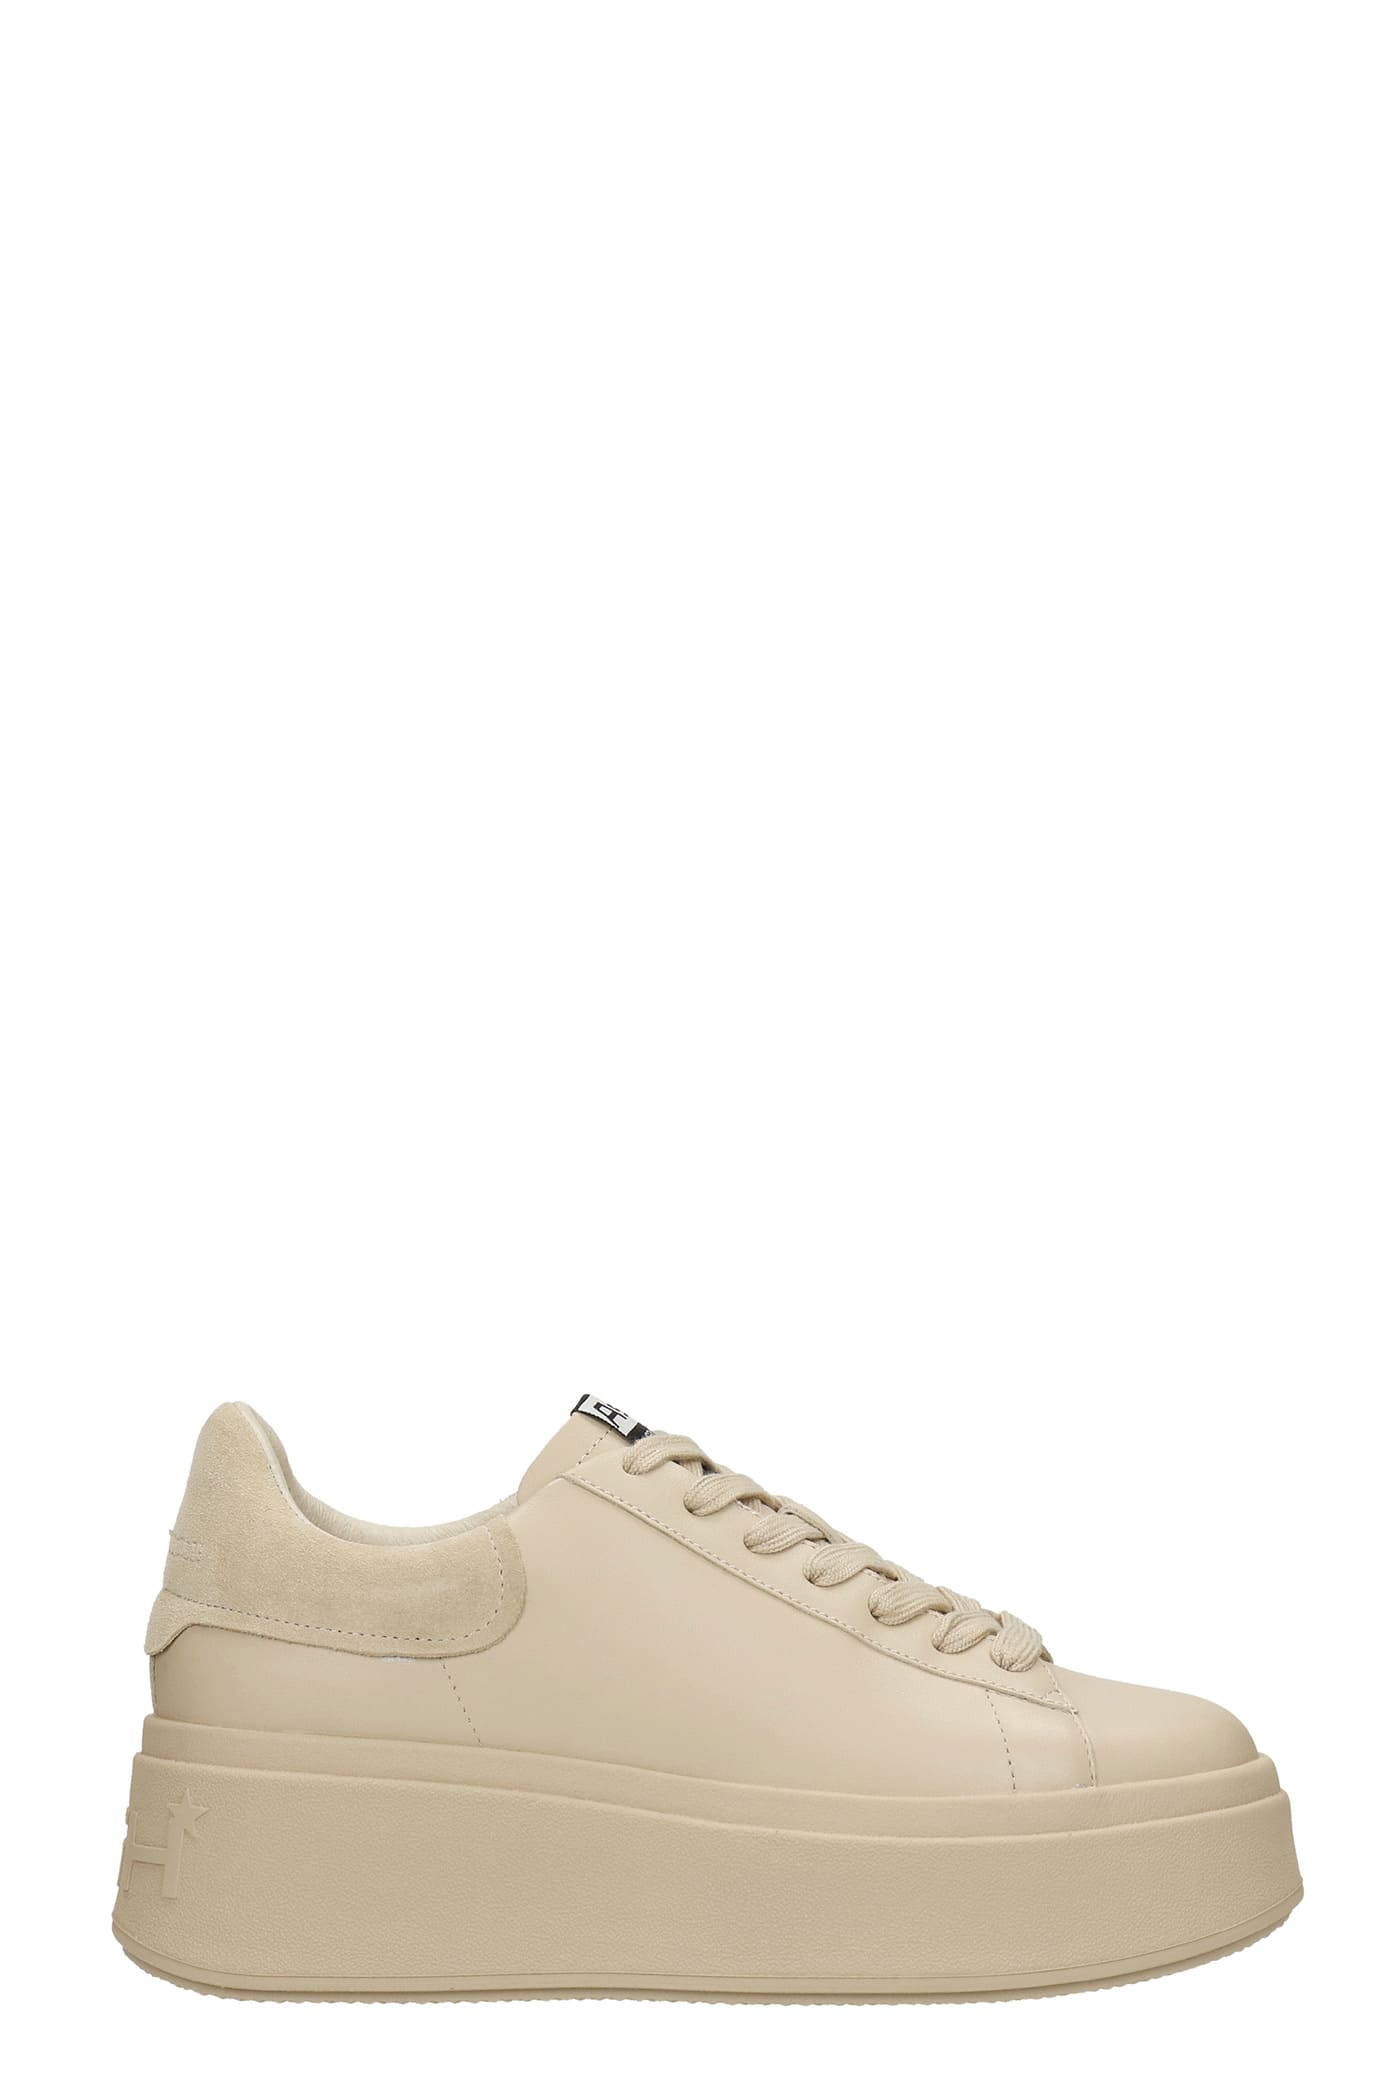 Ash Moby Sneakers In Beige Leather